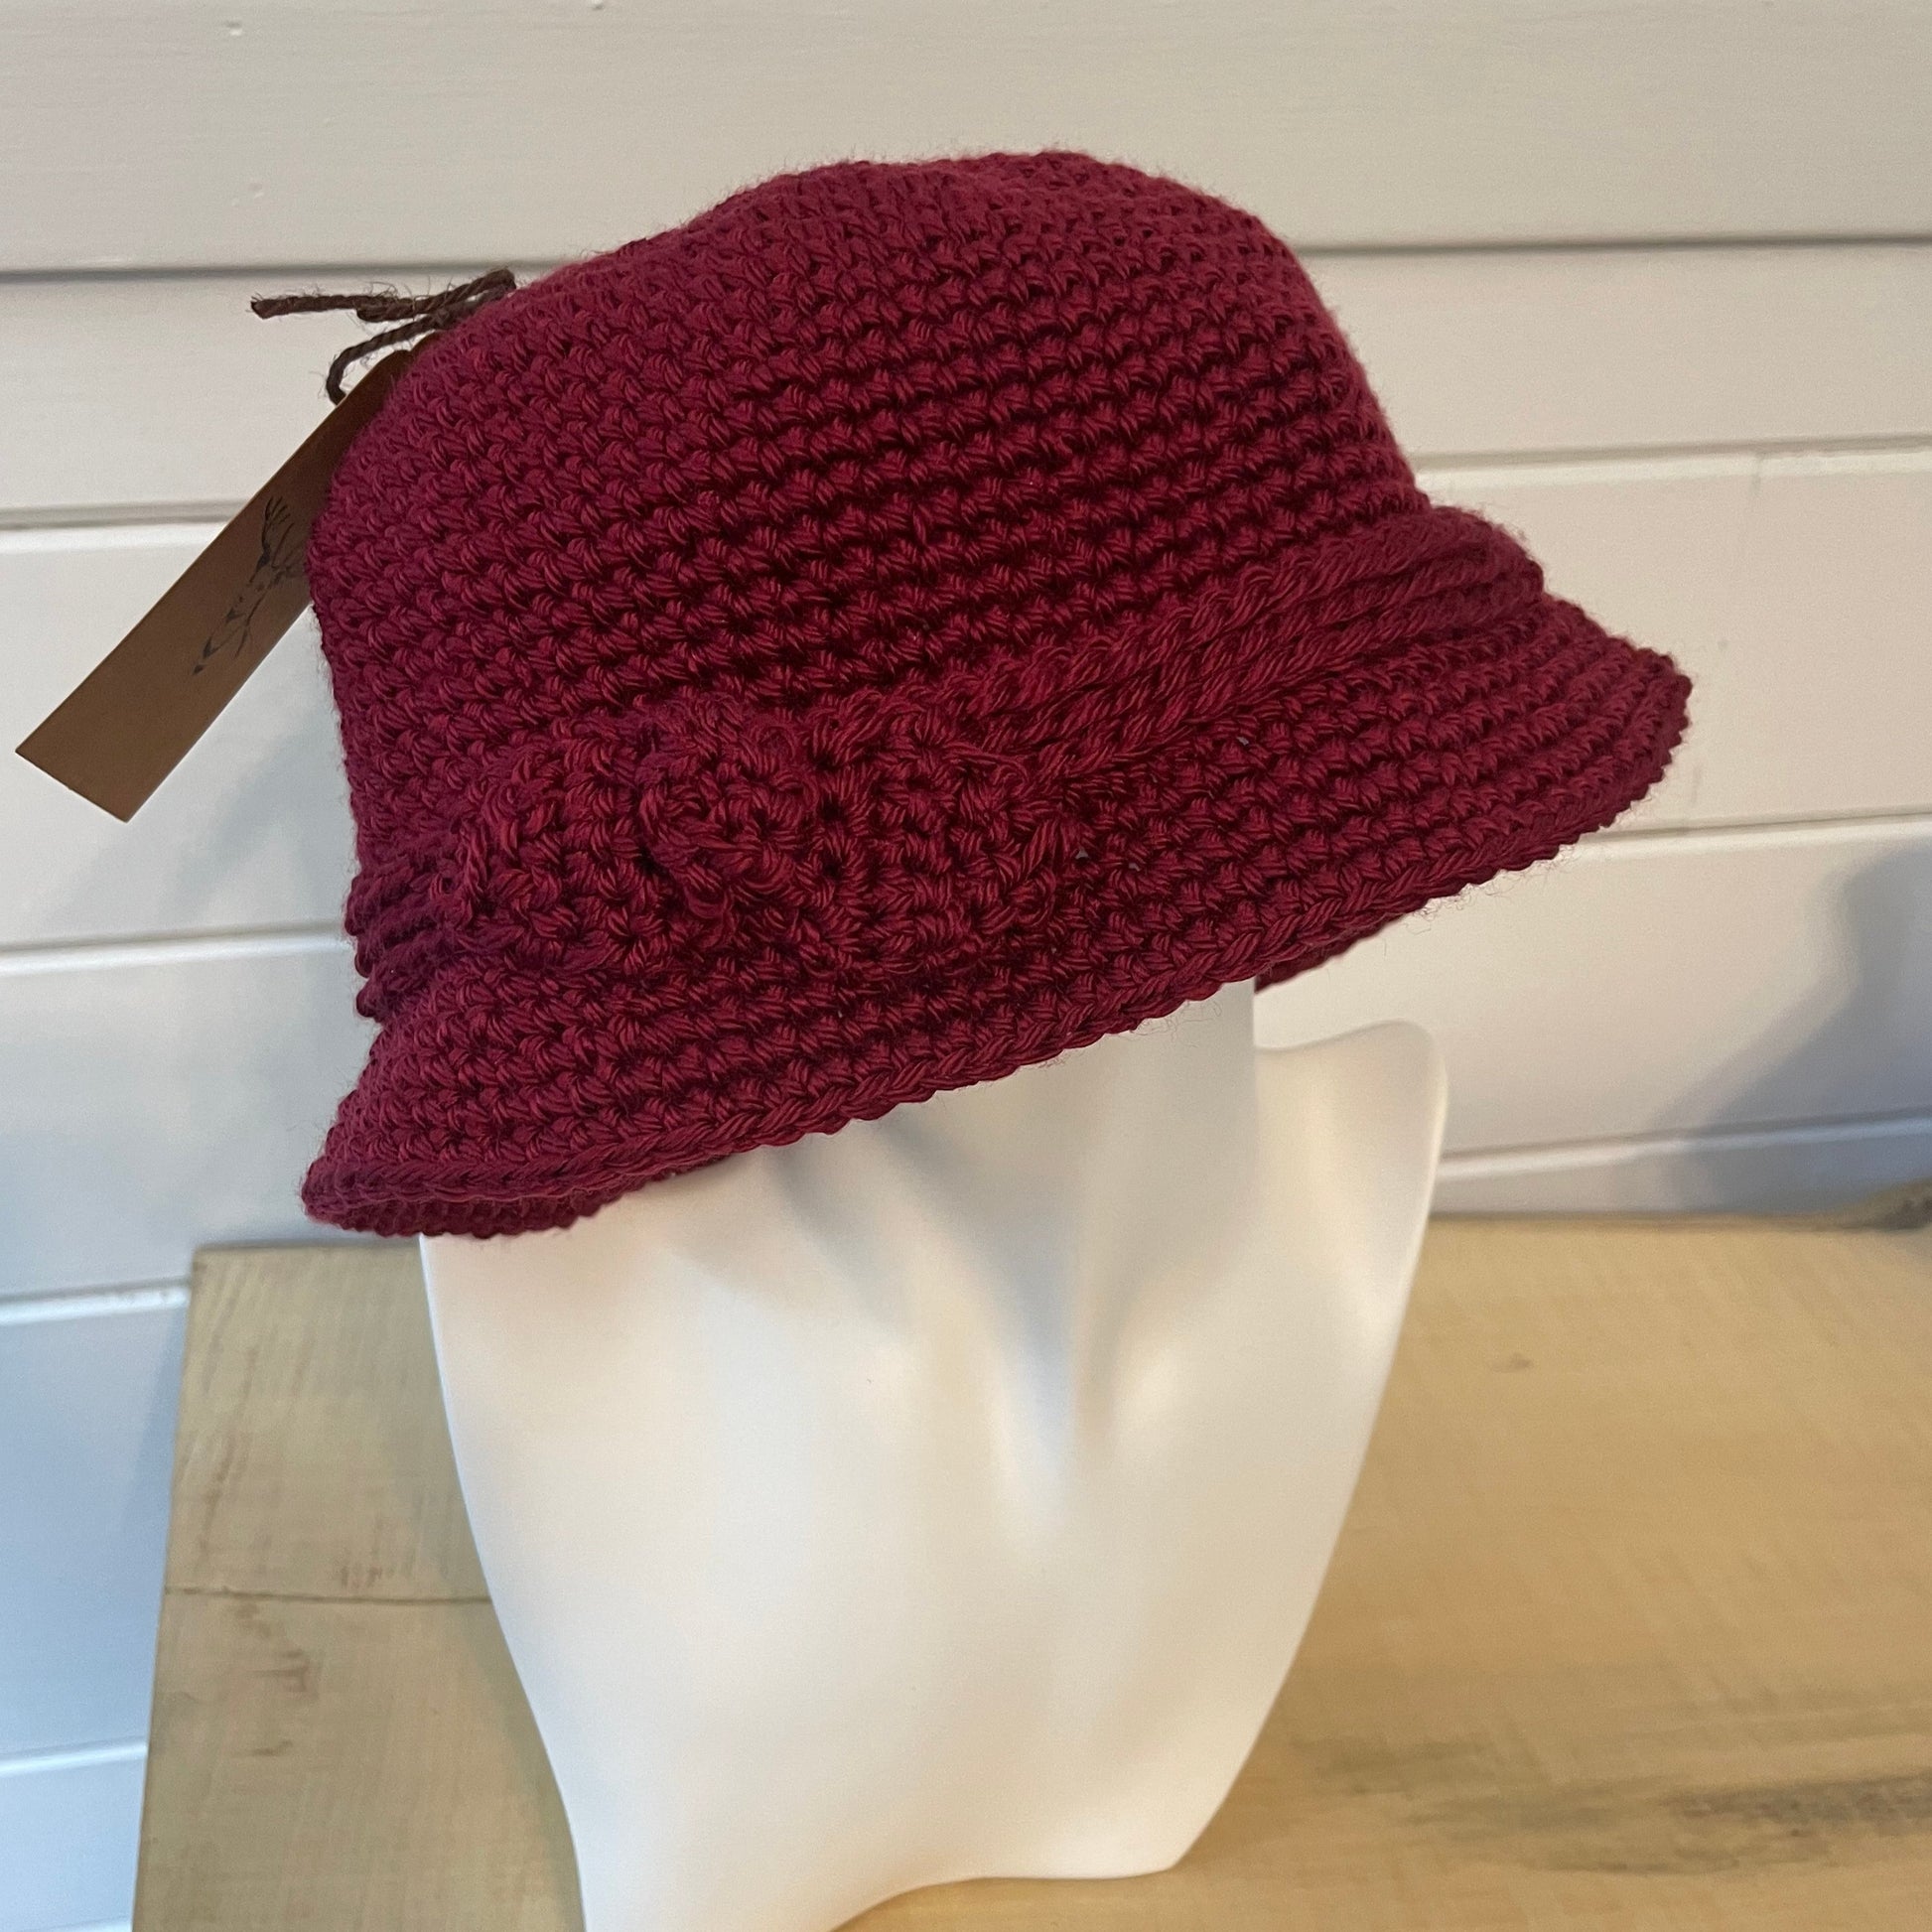 Vintage Retro Style Cloche Hat with Bow Accent in Red Wine Maroon Hand Crocheted Knit Fall Winter Bohemian Boho--shown with bow on right